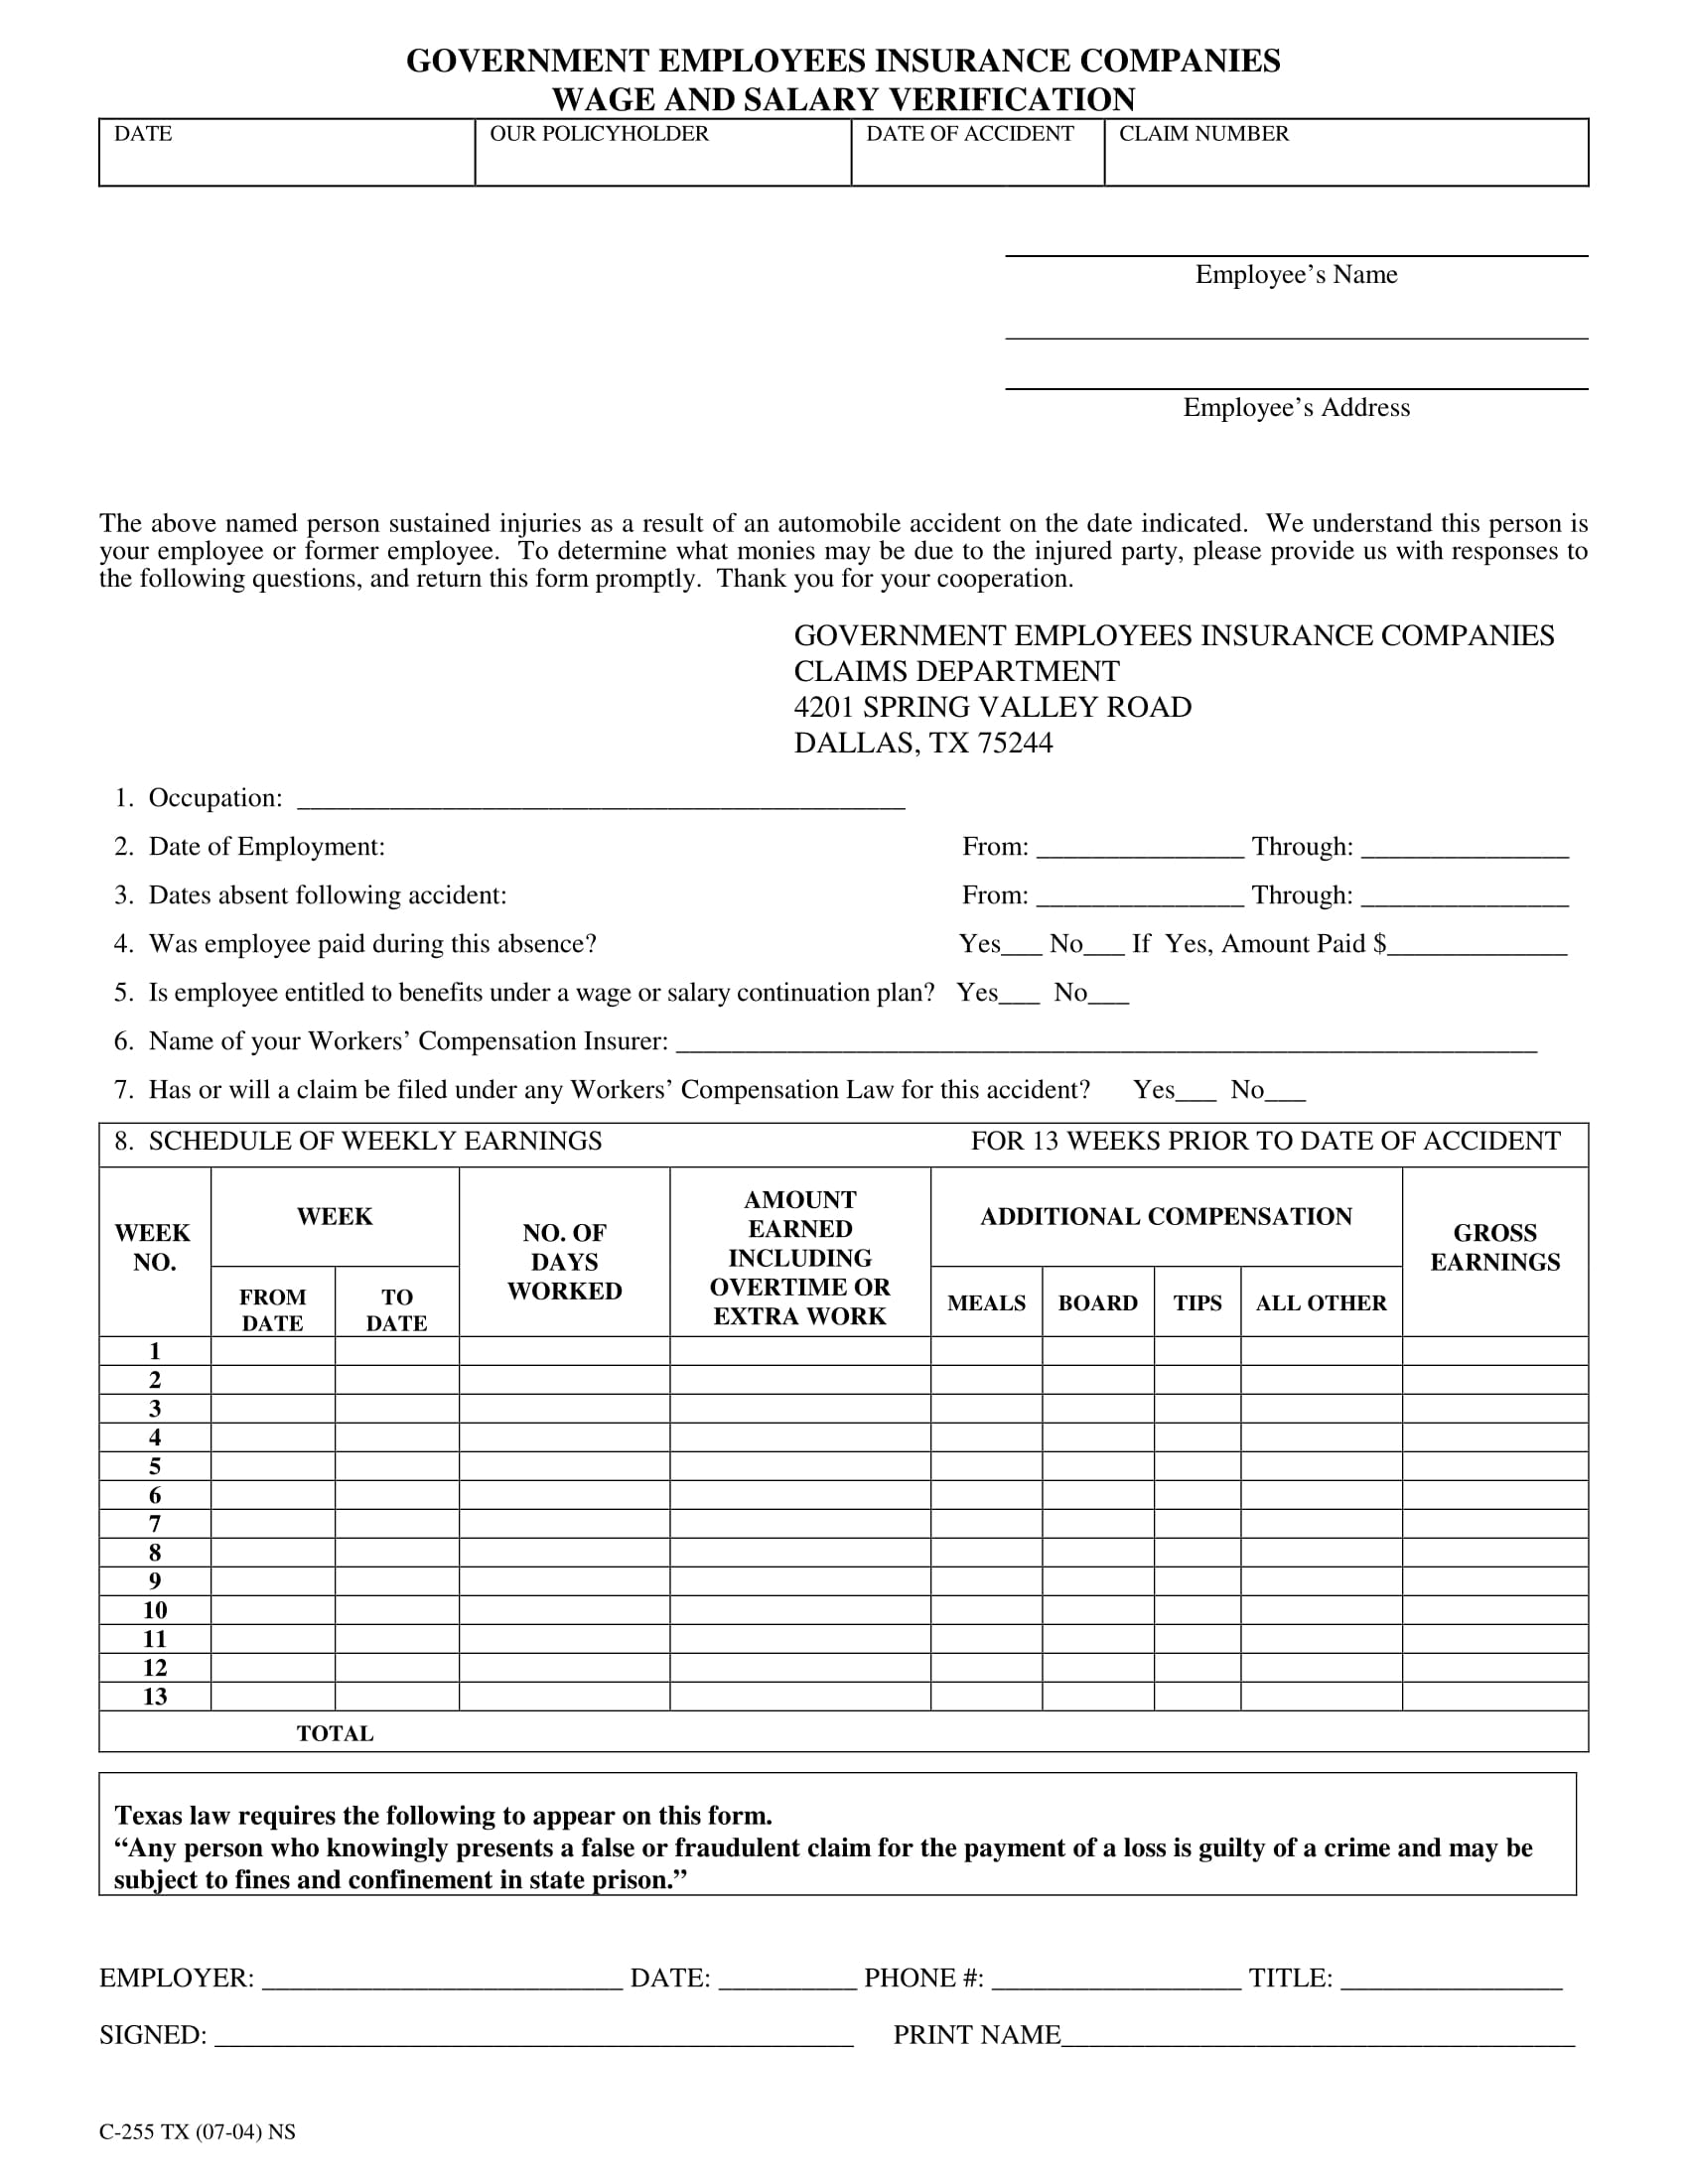 wage and salary verification form 2